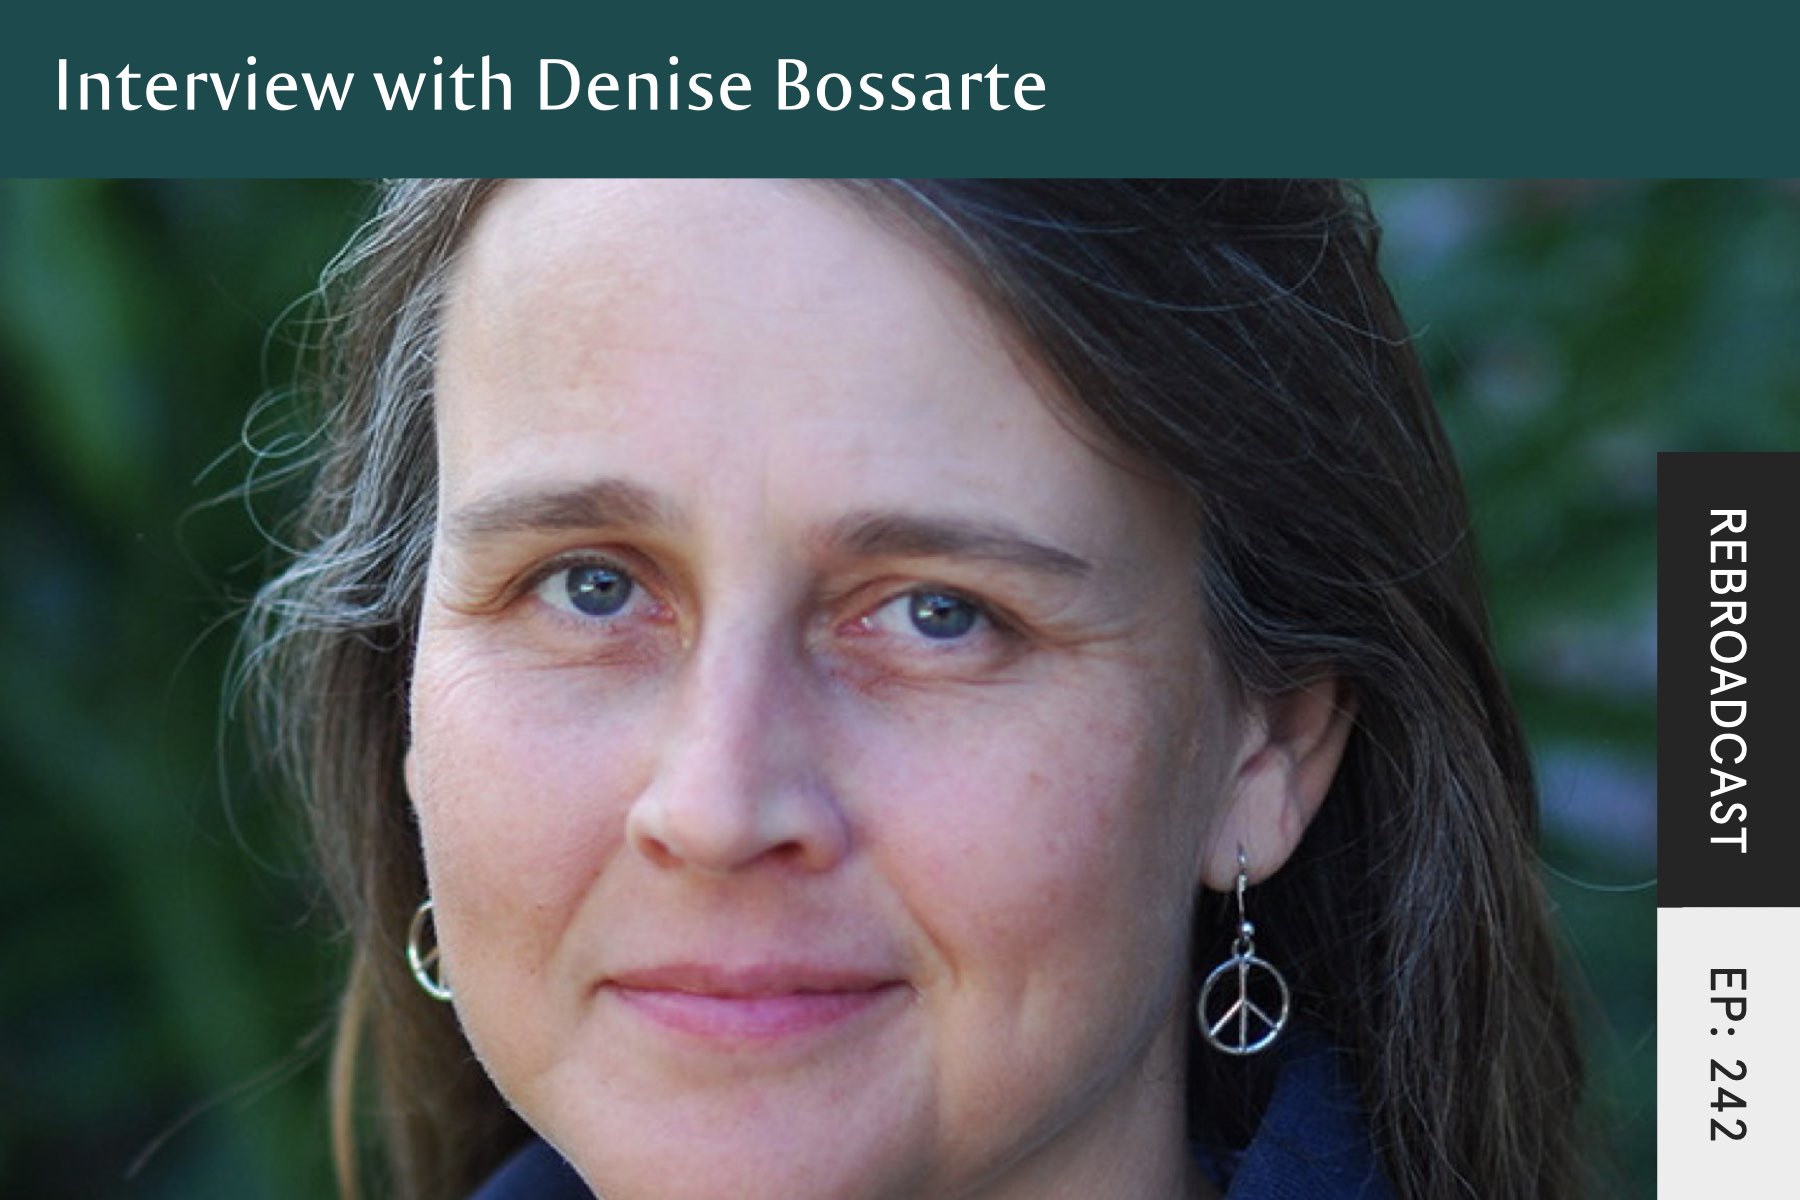 Rebroadcast: Thriving with Denise Bossarte - Seven Health: Eating Disorder Recovery and Anti Diet Nutritionist